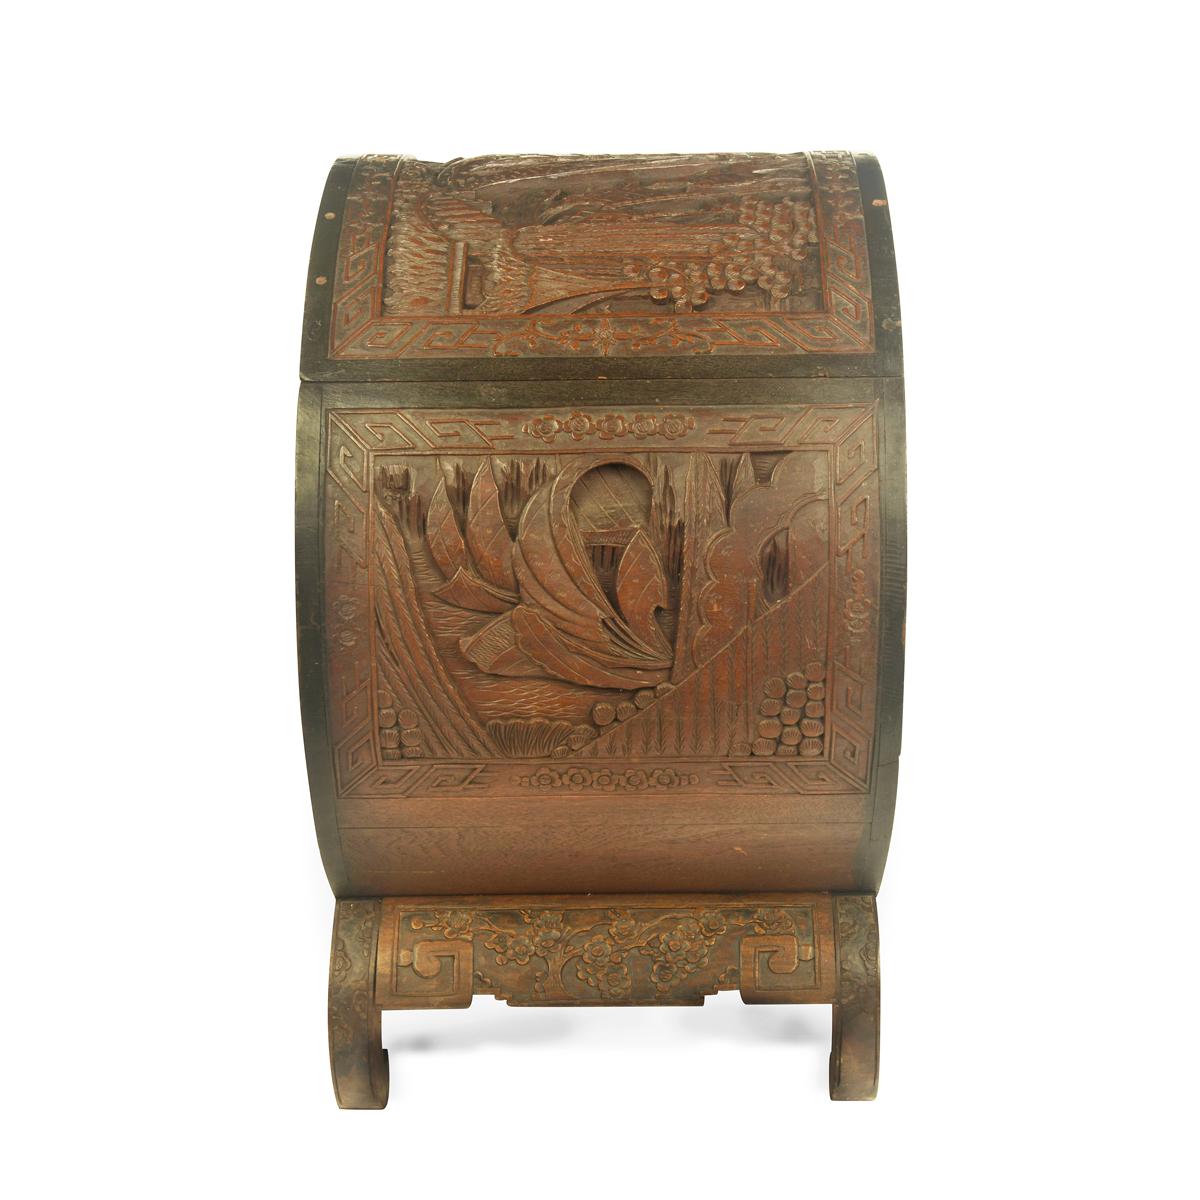 A Hong Kong camphorwood cylindrical chest, the drum shaped body with a hinged lid set on its side on a typical base with short, in-curved legs, incised throughout in high relief with scenes of sailing ships, at sea and by a bridge, and a troop of